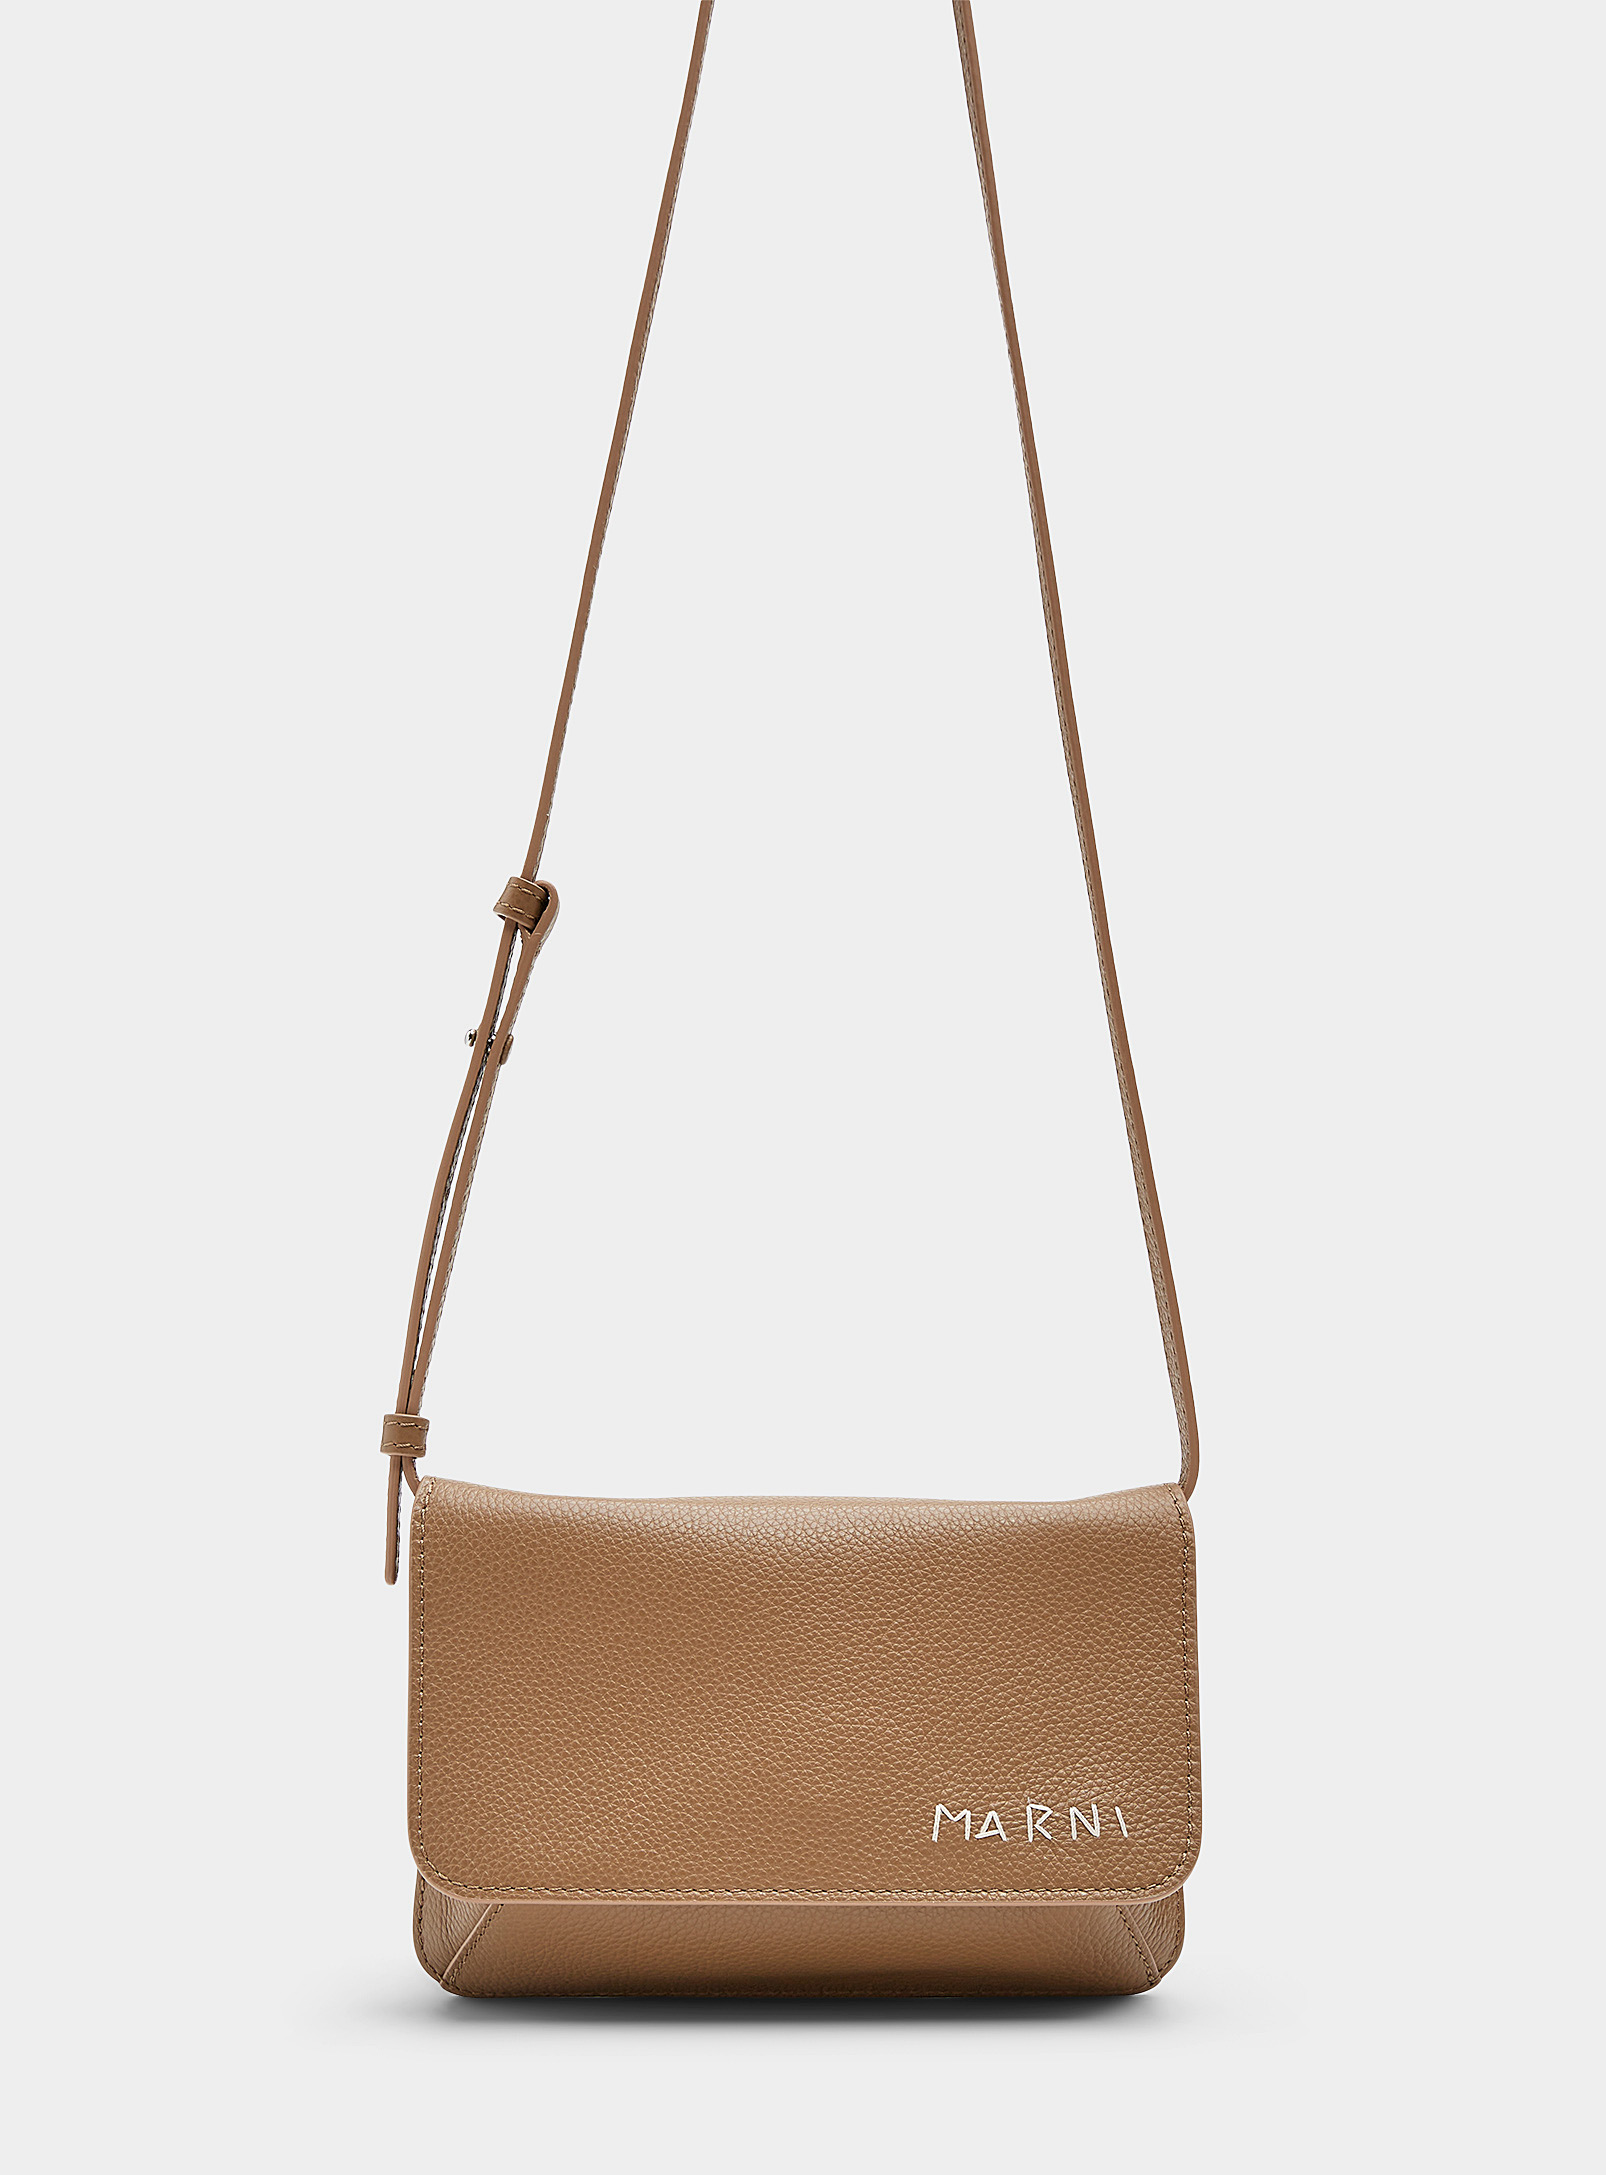 MARNI - Men's Small cross-body bag with flap